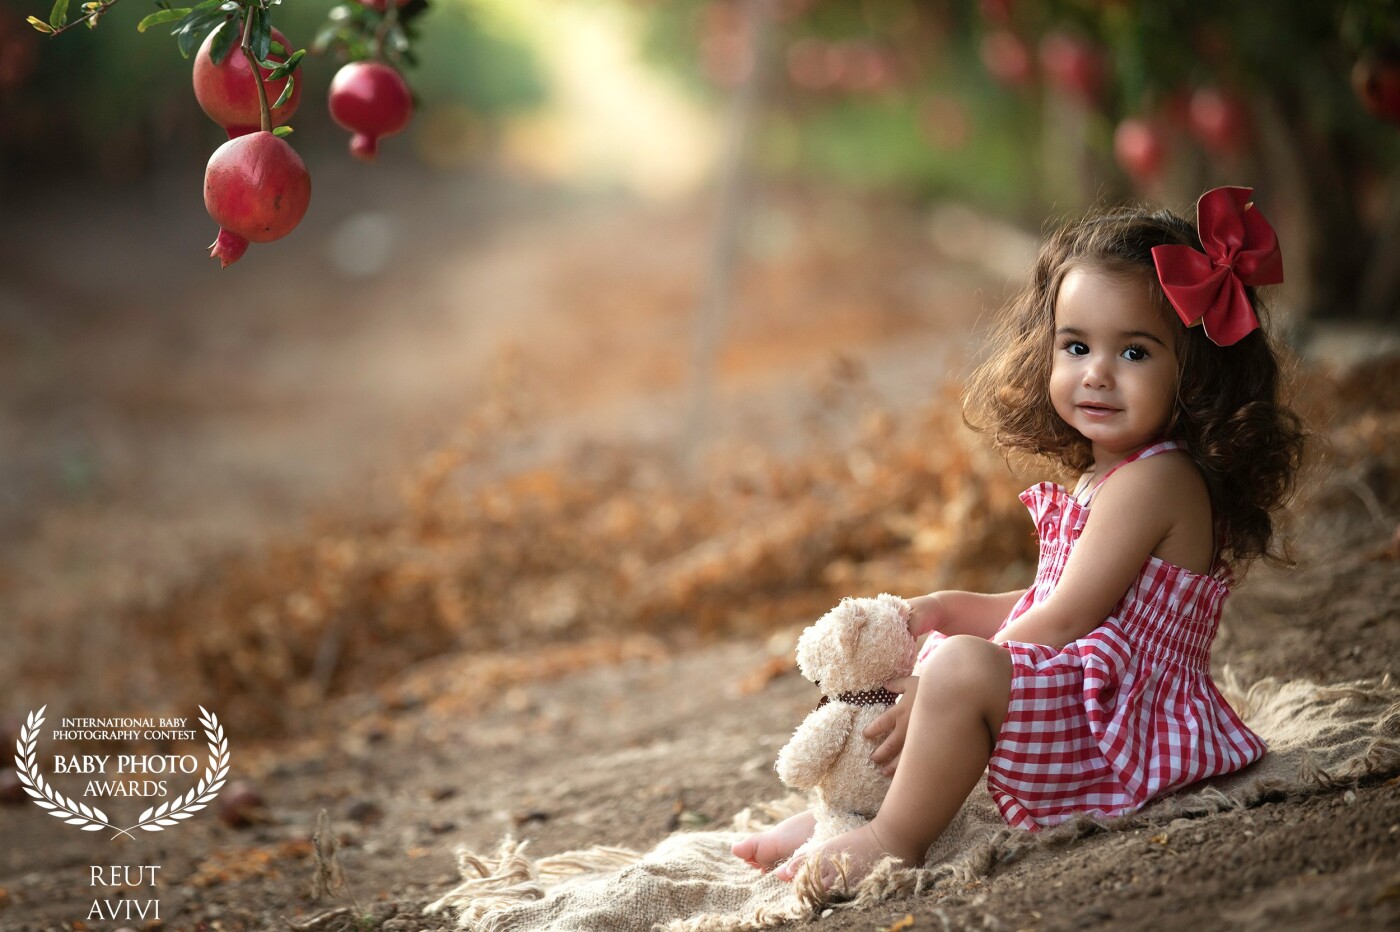 I took my beautiful baby girl to a Pomegranate field to take pictures for the New Year's Day greeting,<br />
It turned out more beautiful than I expected.